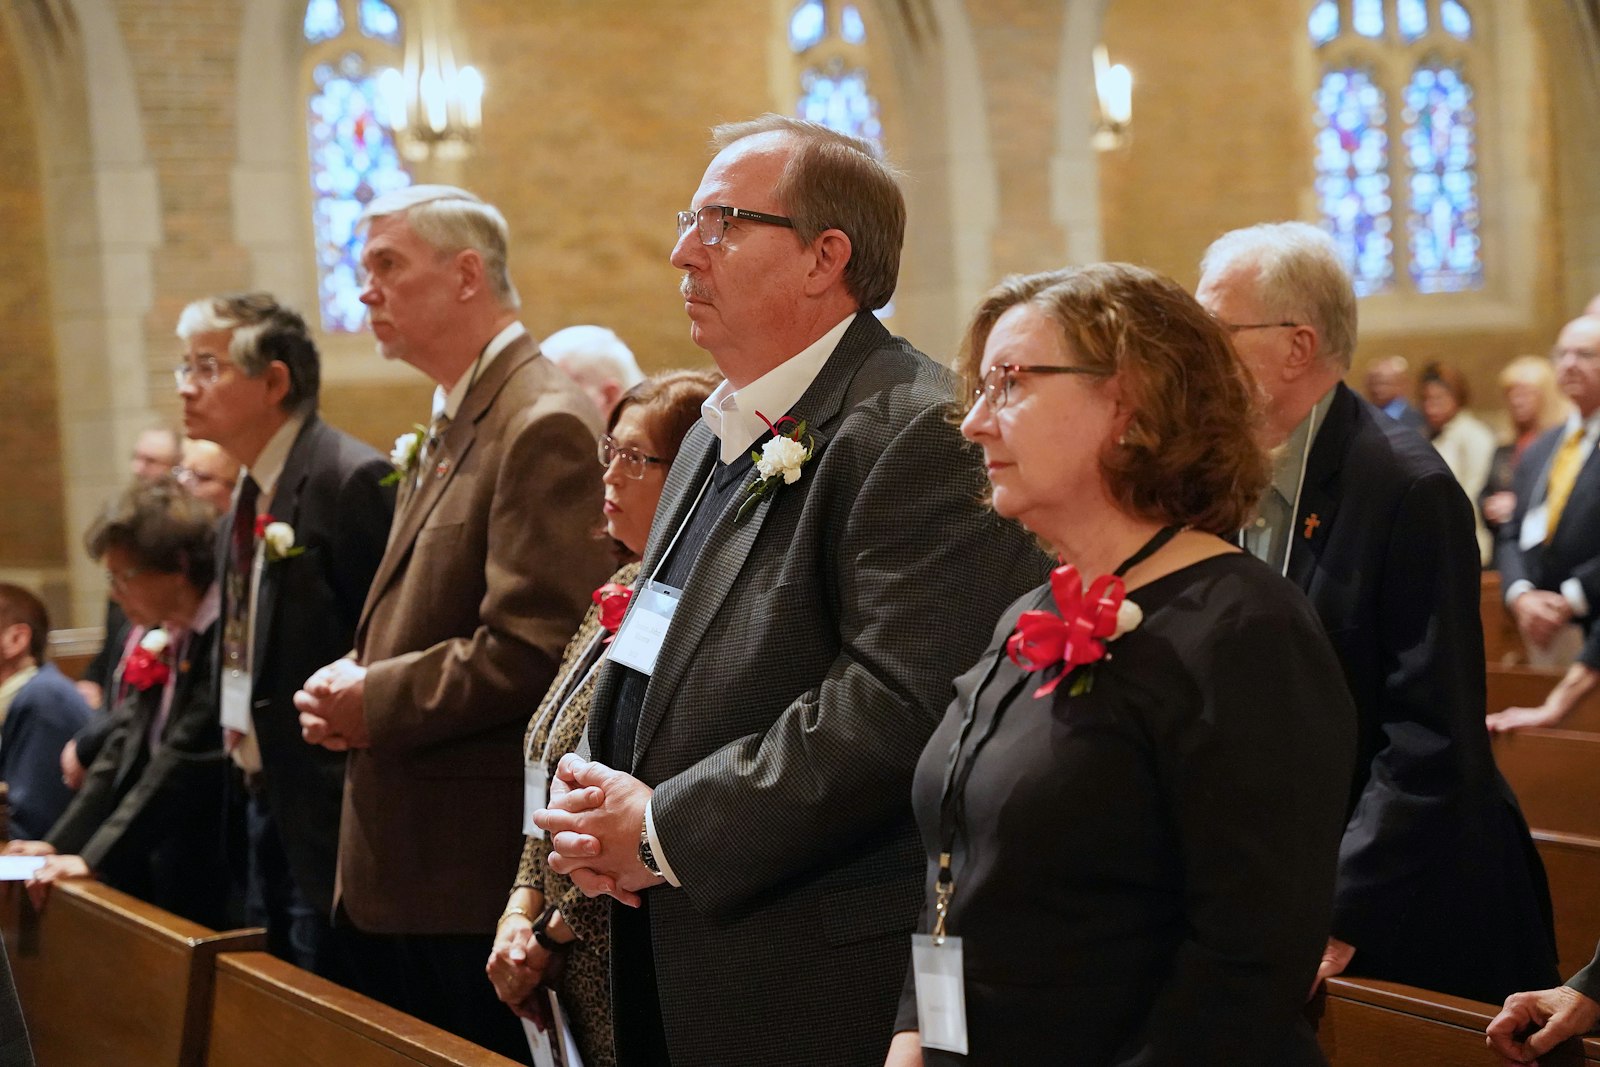 Deacon John Manera and his wife, Laura, participate in a special Mass for jubilarian deacons Oct. 30 at Sacred Heart Major Seminary in Detroit. Deacon Manera, who serves at St. Joseph the Worker Parish in Lake Orion, is celebrating his 10th anniversary as a deacon.